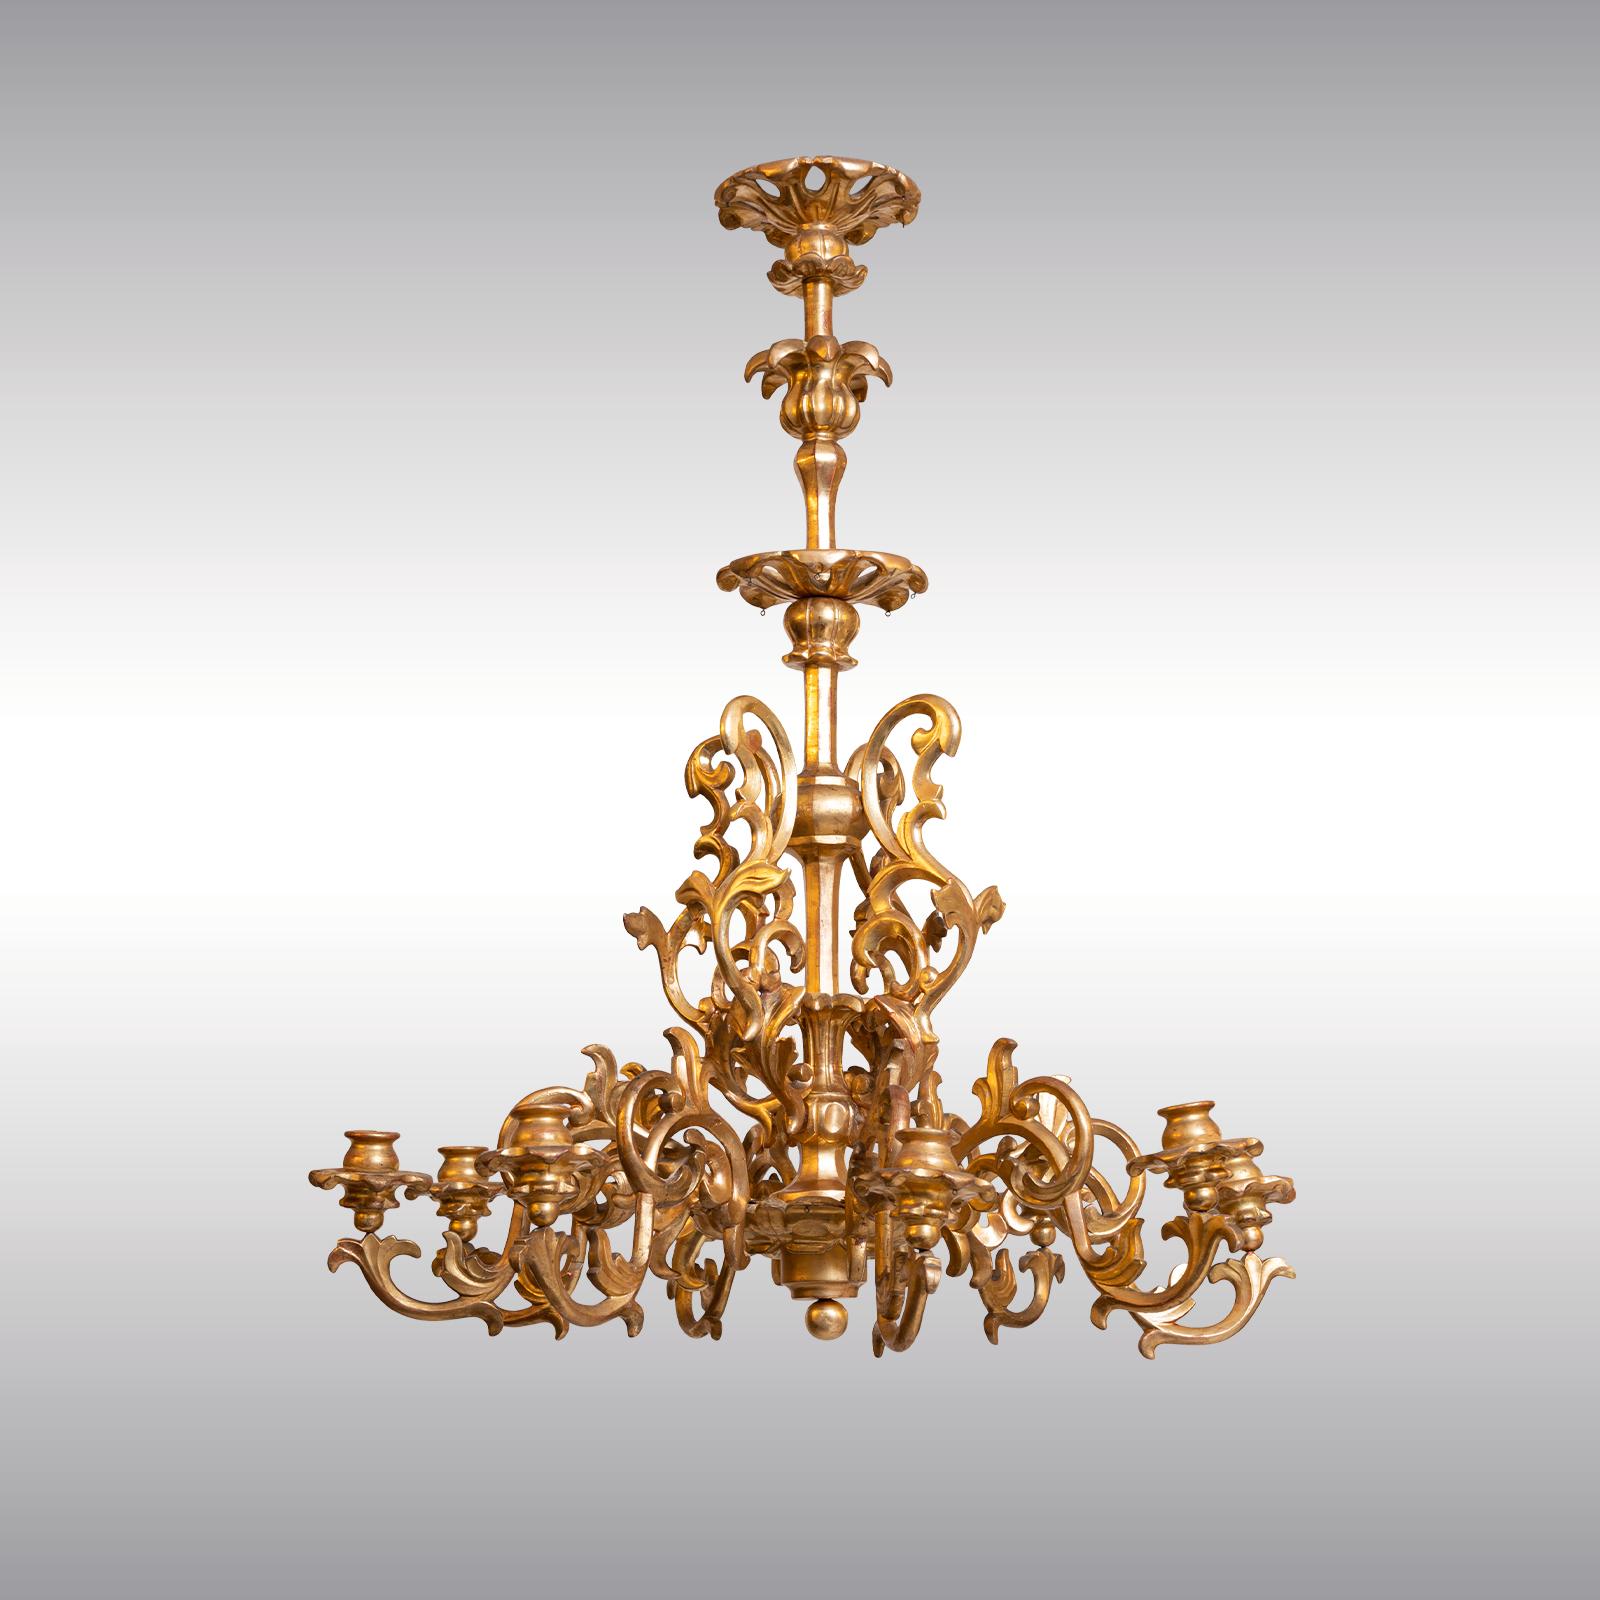 Hand-Crafted Original Maria Theresien Rococo Chandelier, Leaf Gilded, Newly Restored For Sale